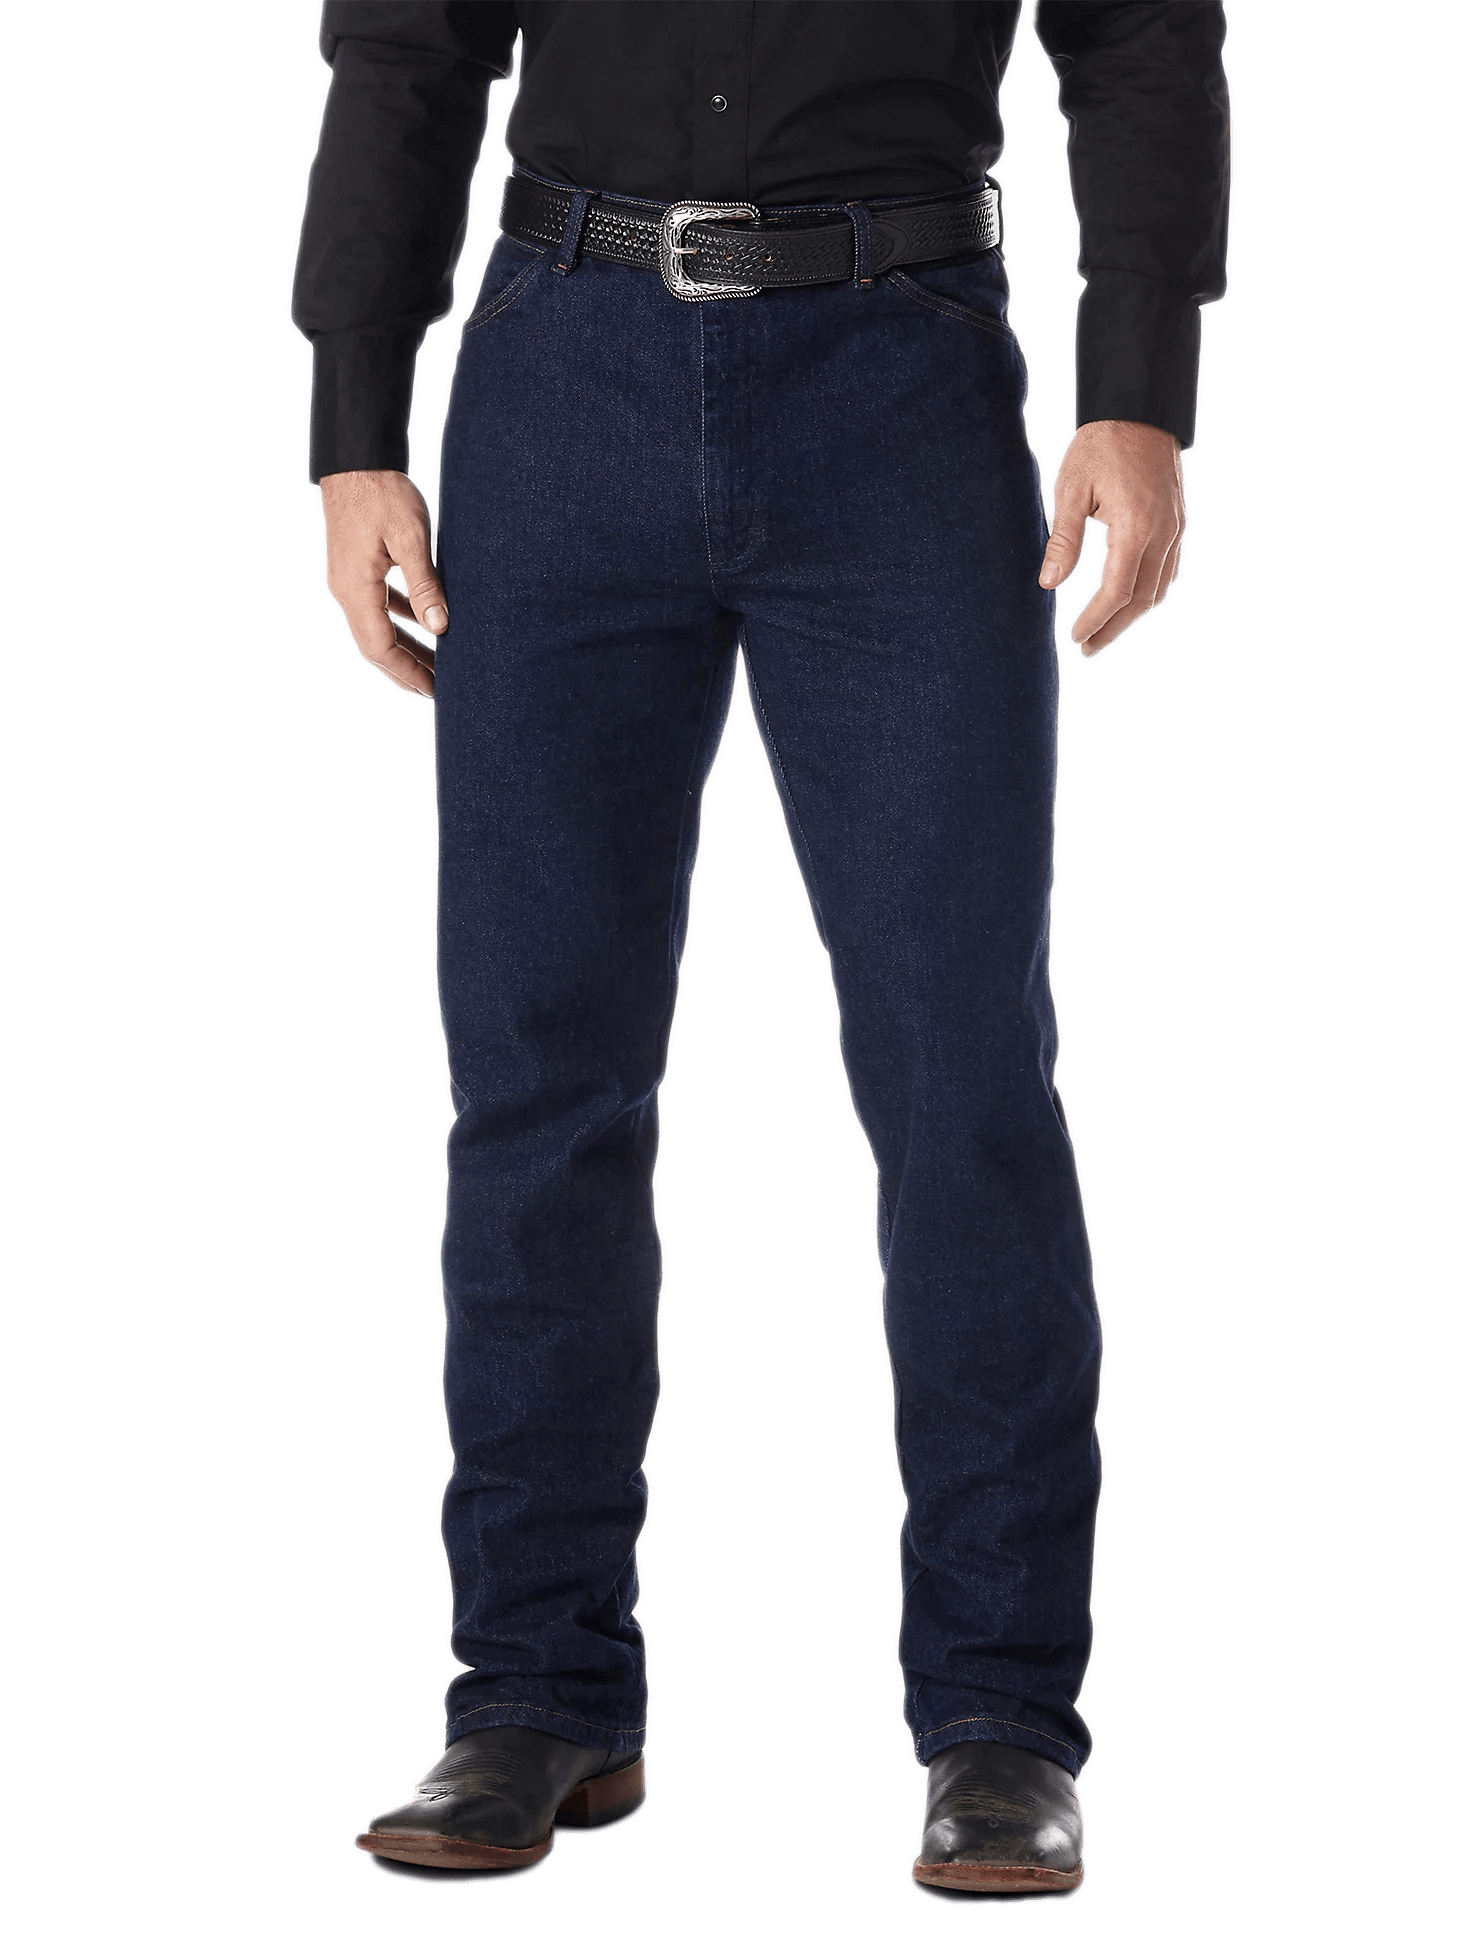 Quality Wrangler Men's Bootcut Stretch Work Jeans